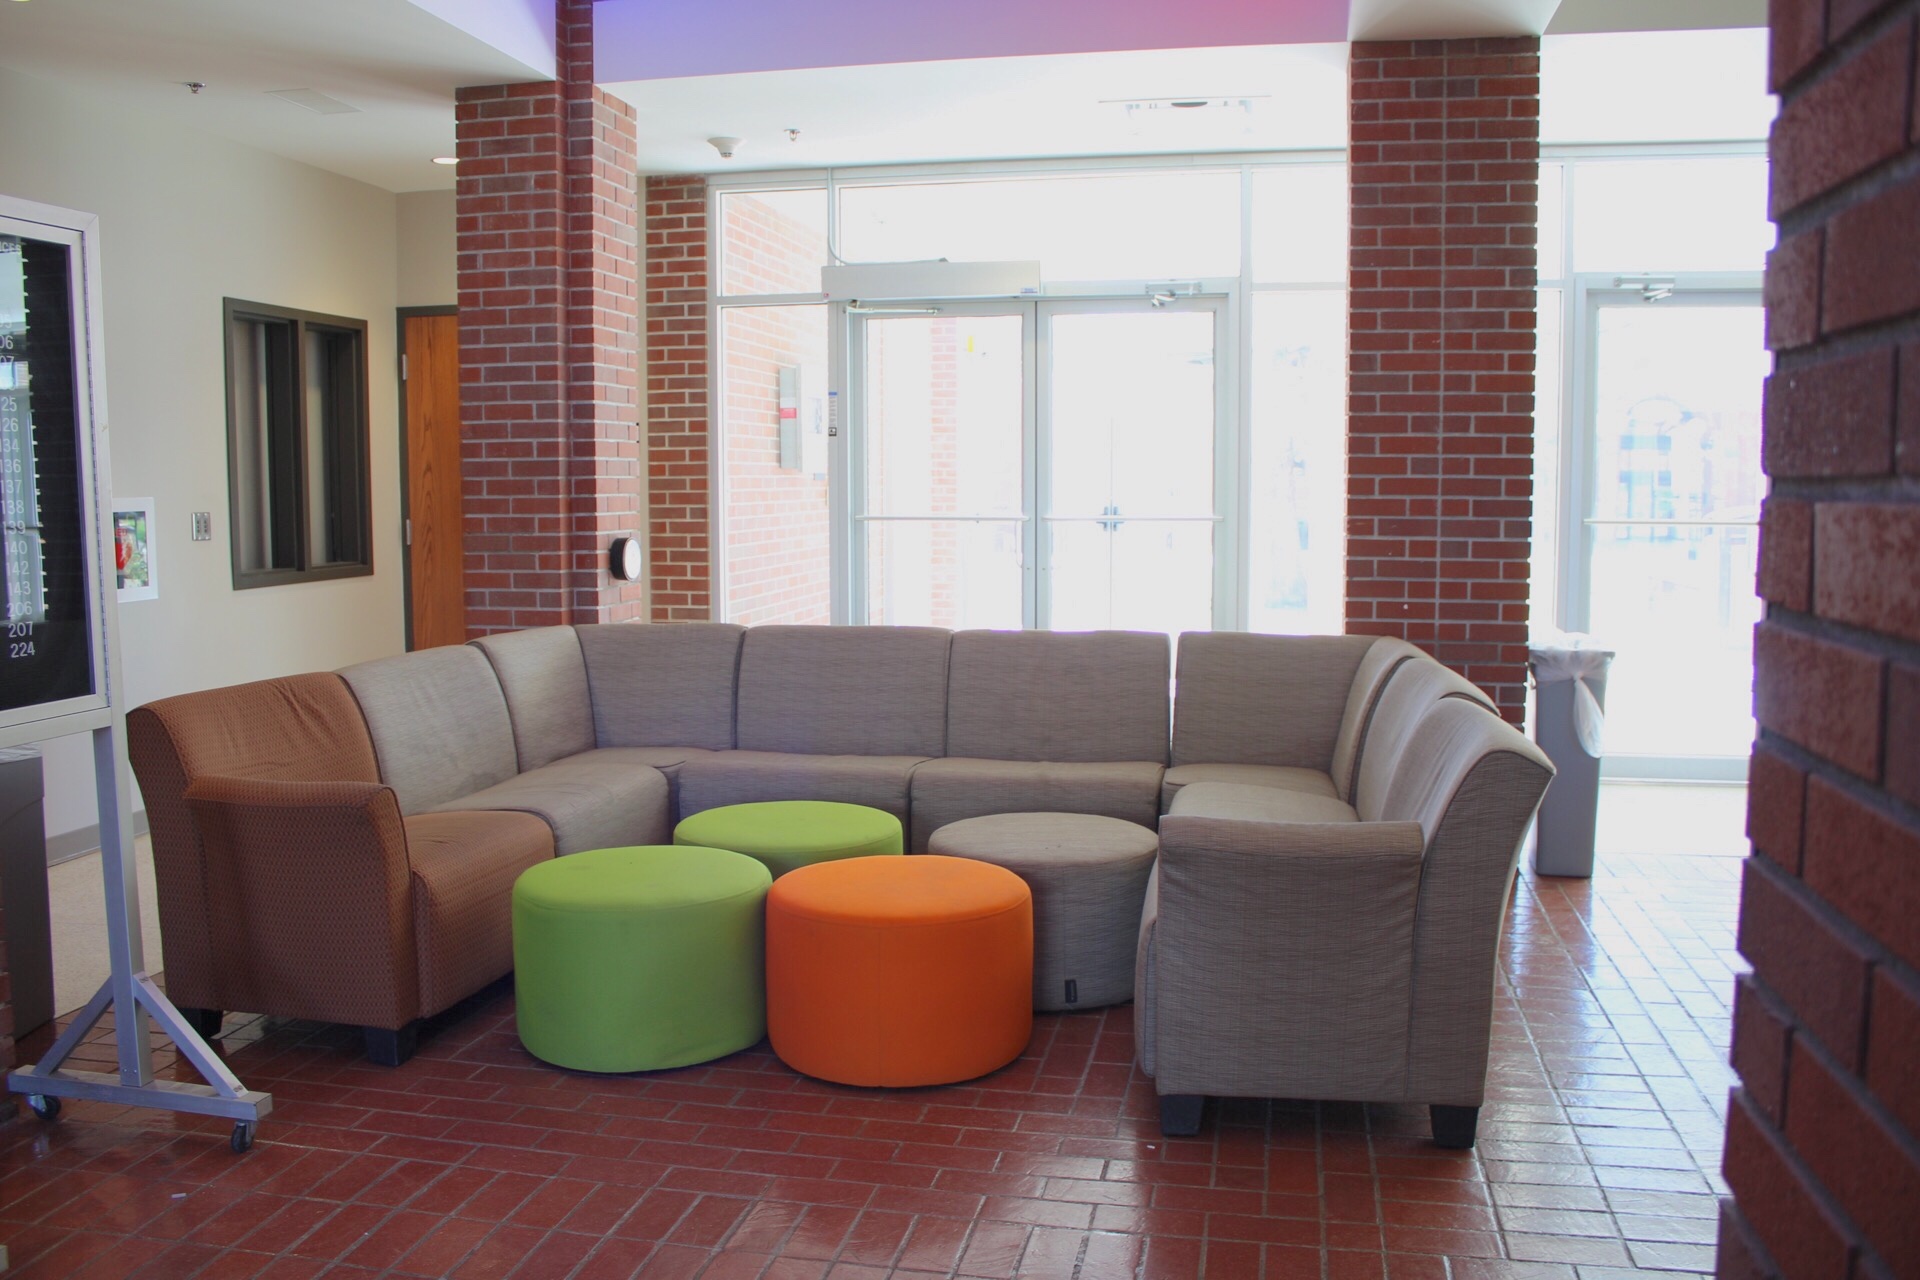 Jindra Fine Arts Lobby showing one of the seating areas.